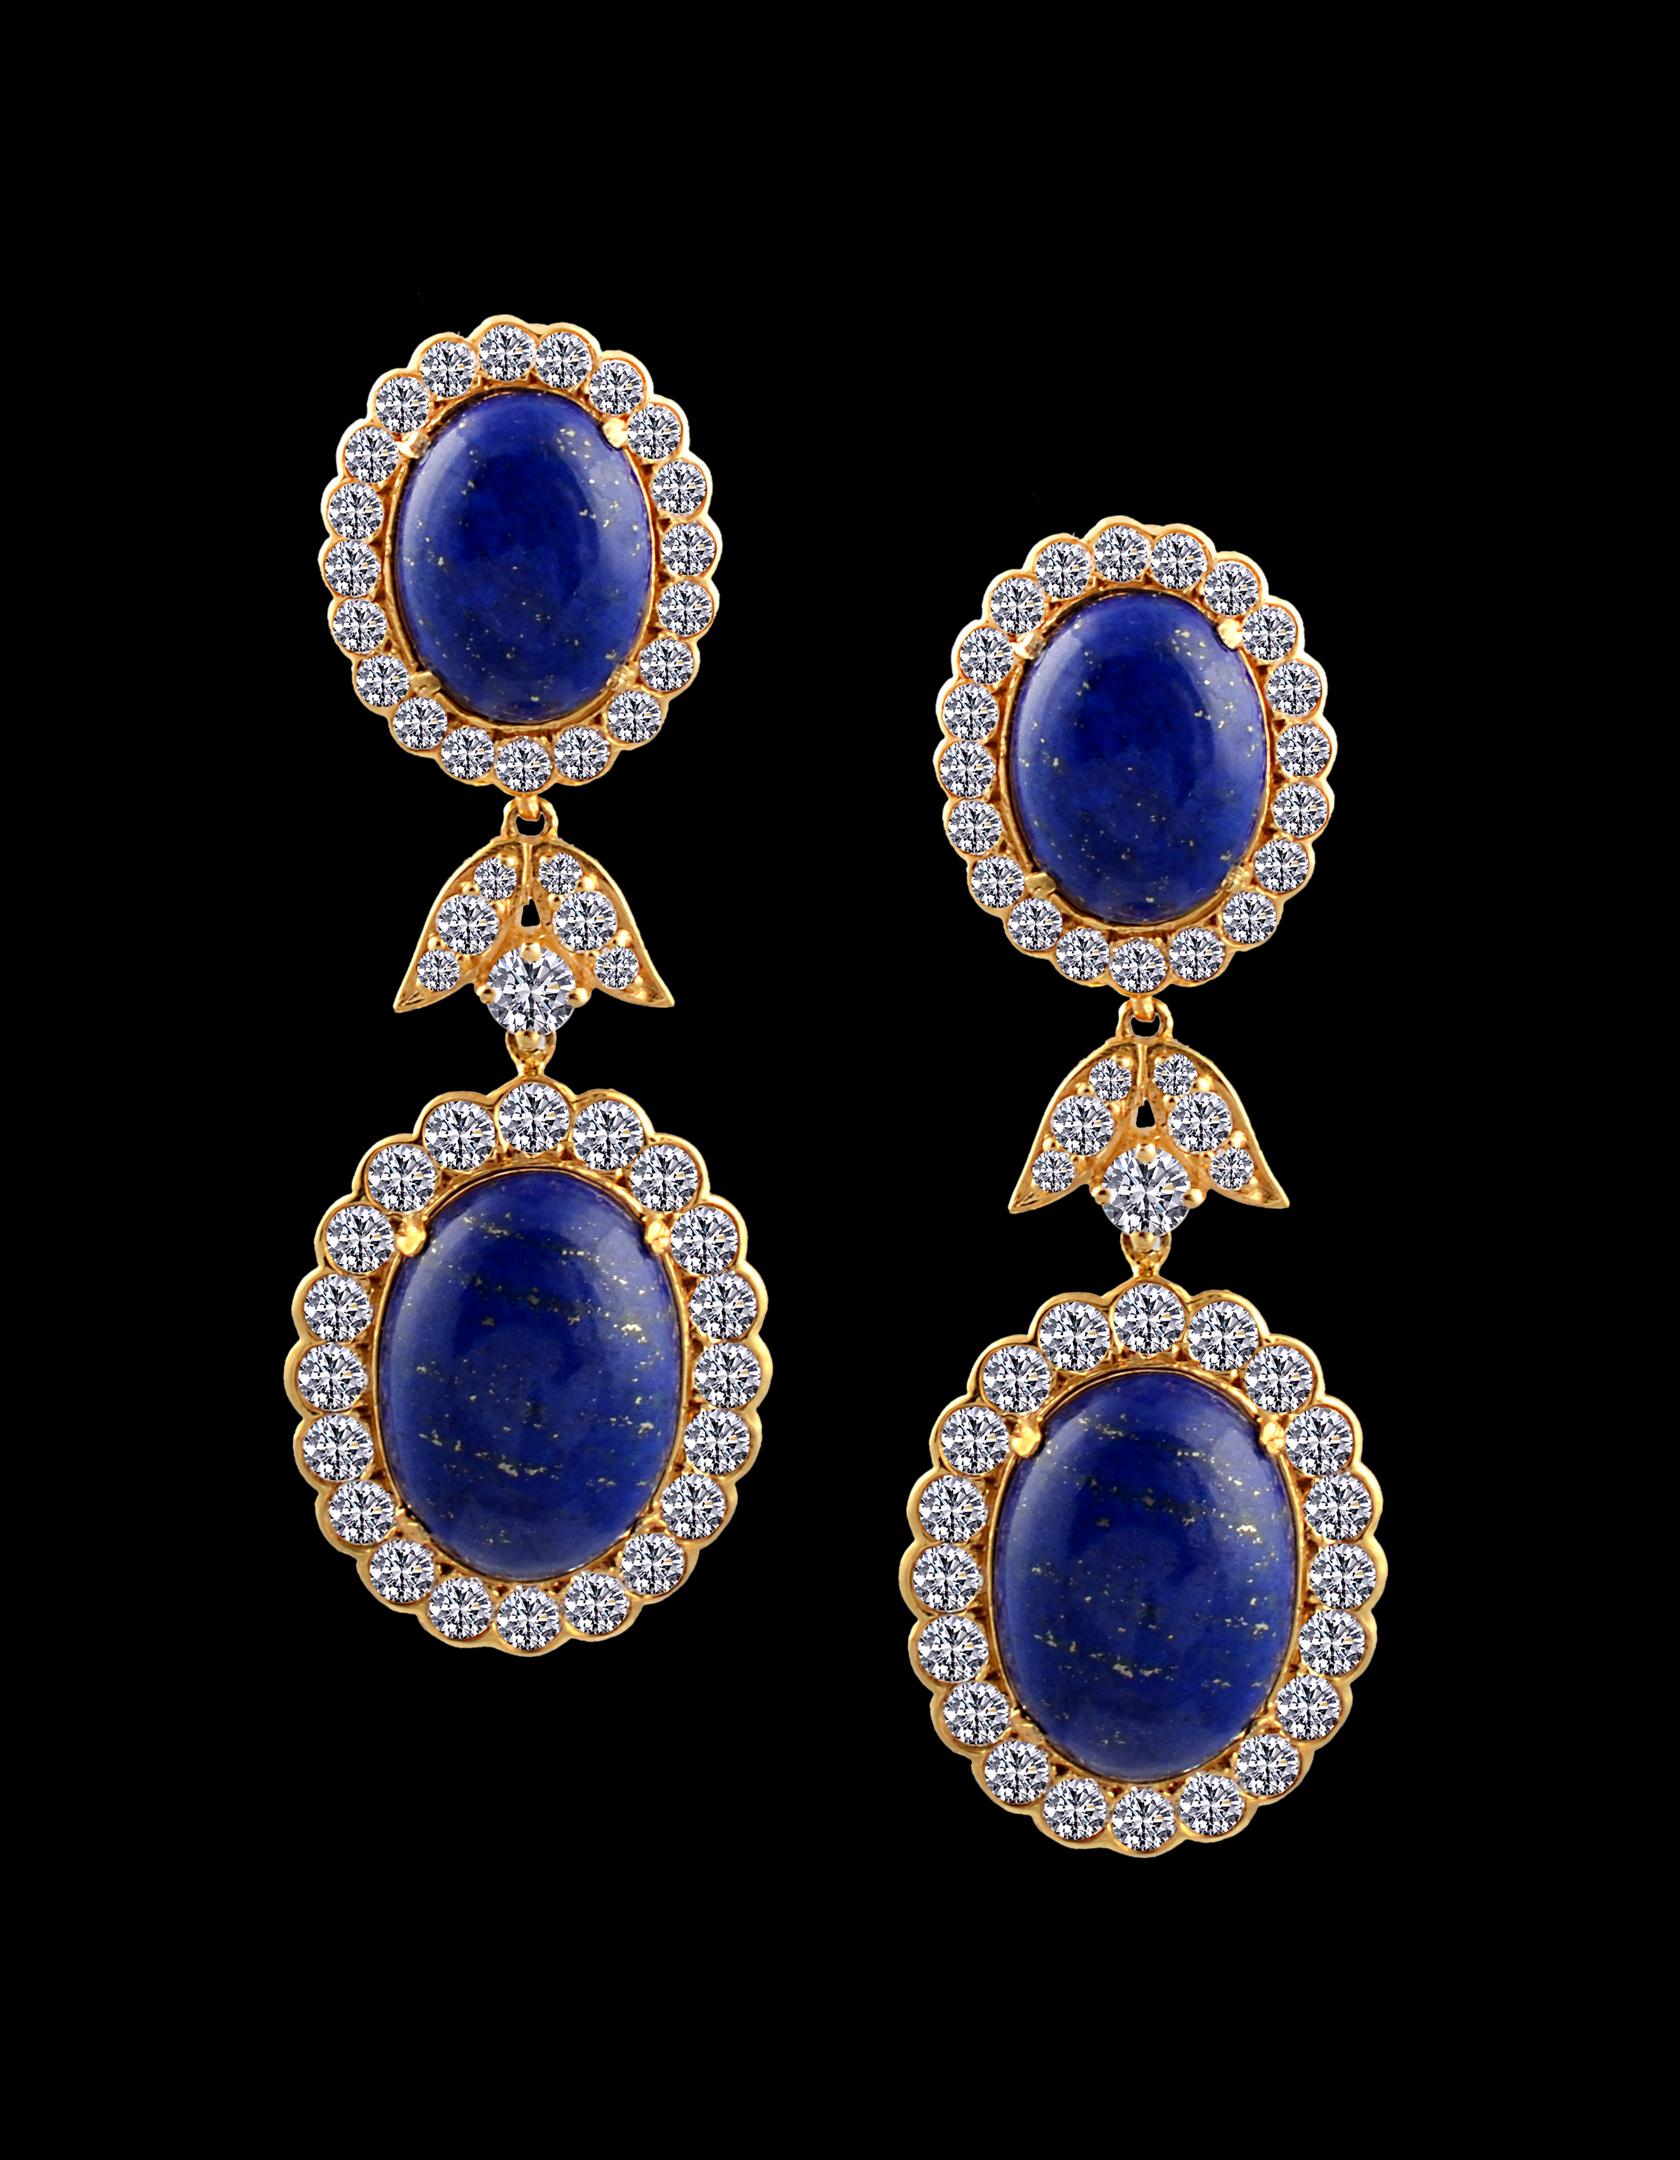 15Ct Diamond & 30Ct Natural Lapis Lazuli Set 18 K Y Gold, Ring, Earring, Pendant In Excellent Condition For Sale In New York, NY